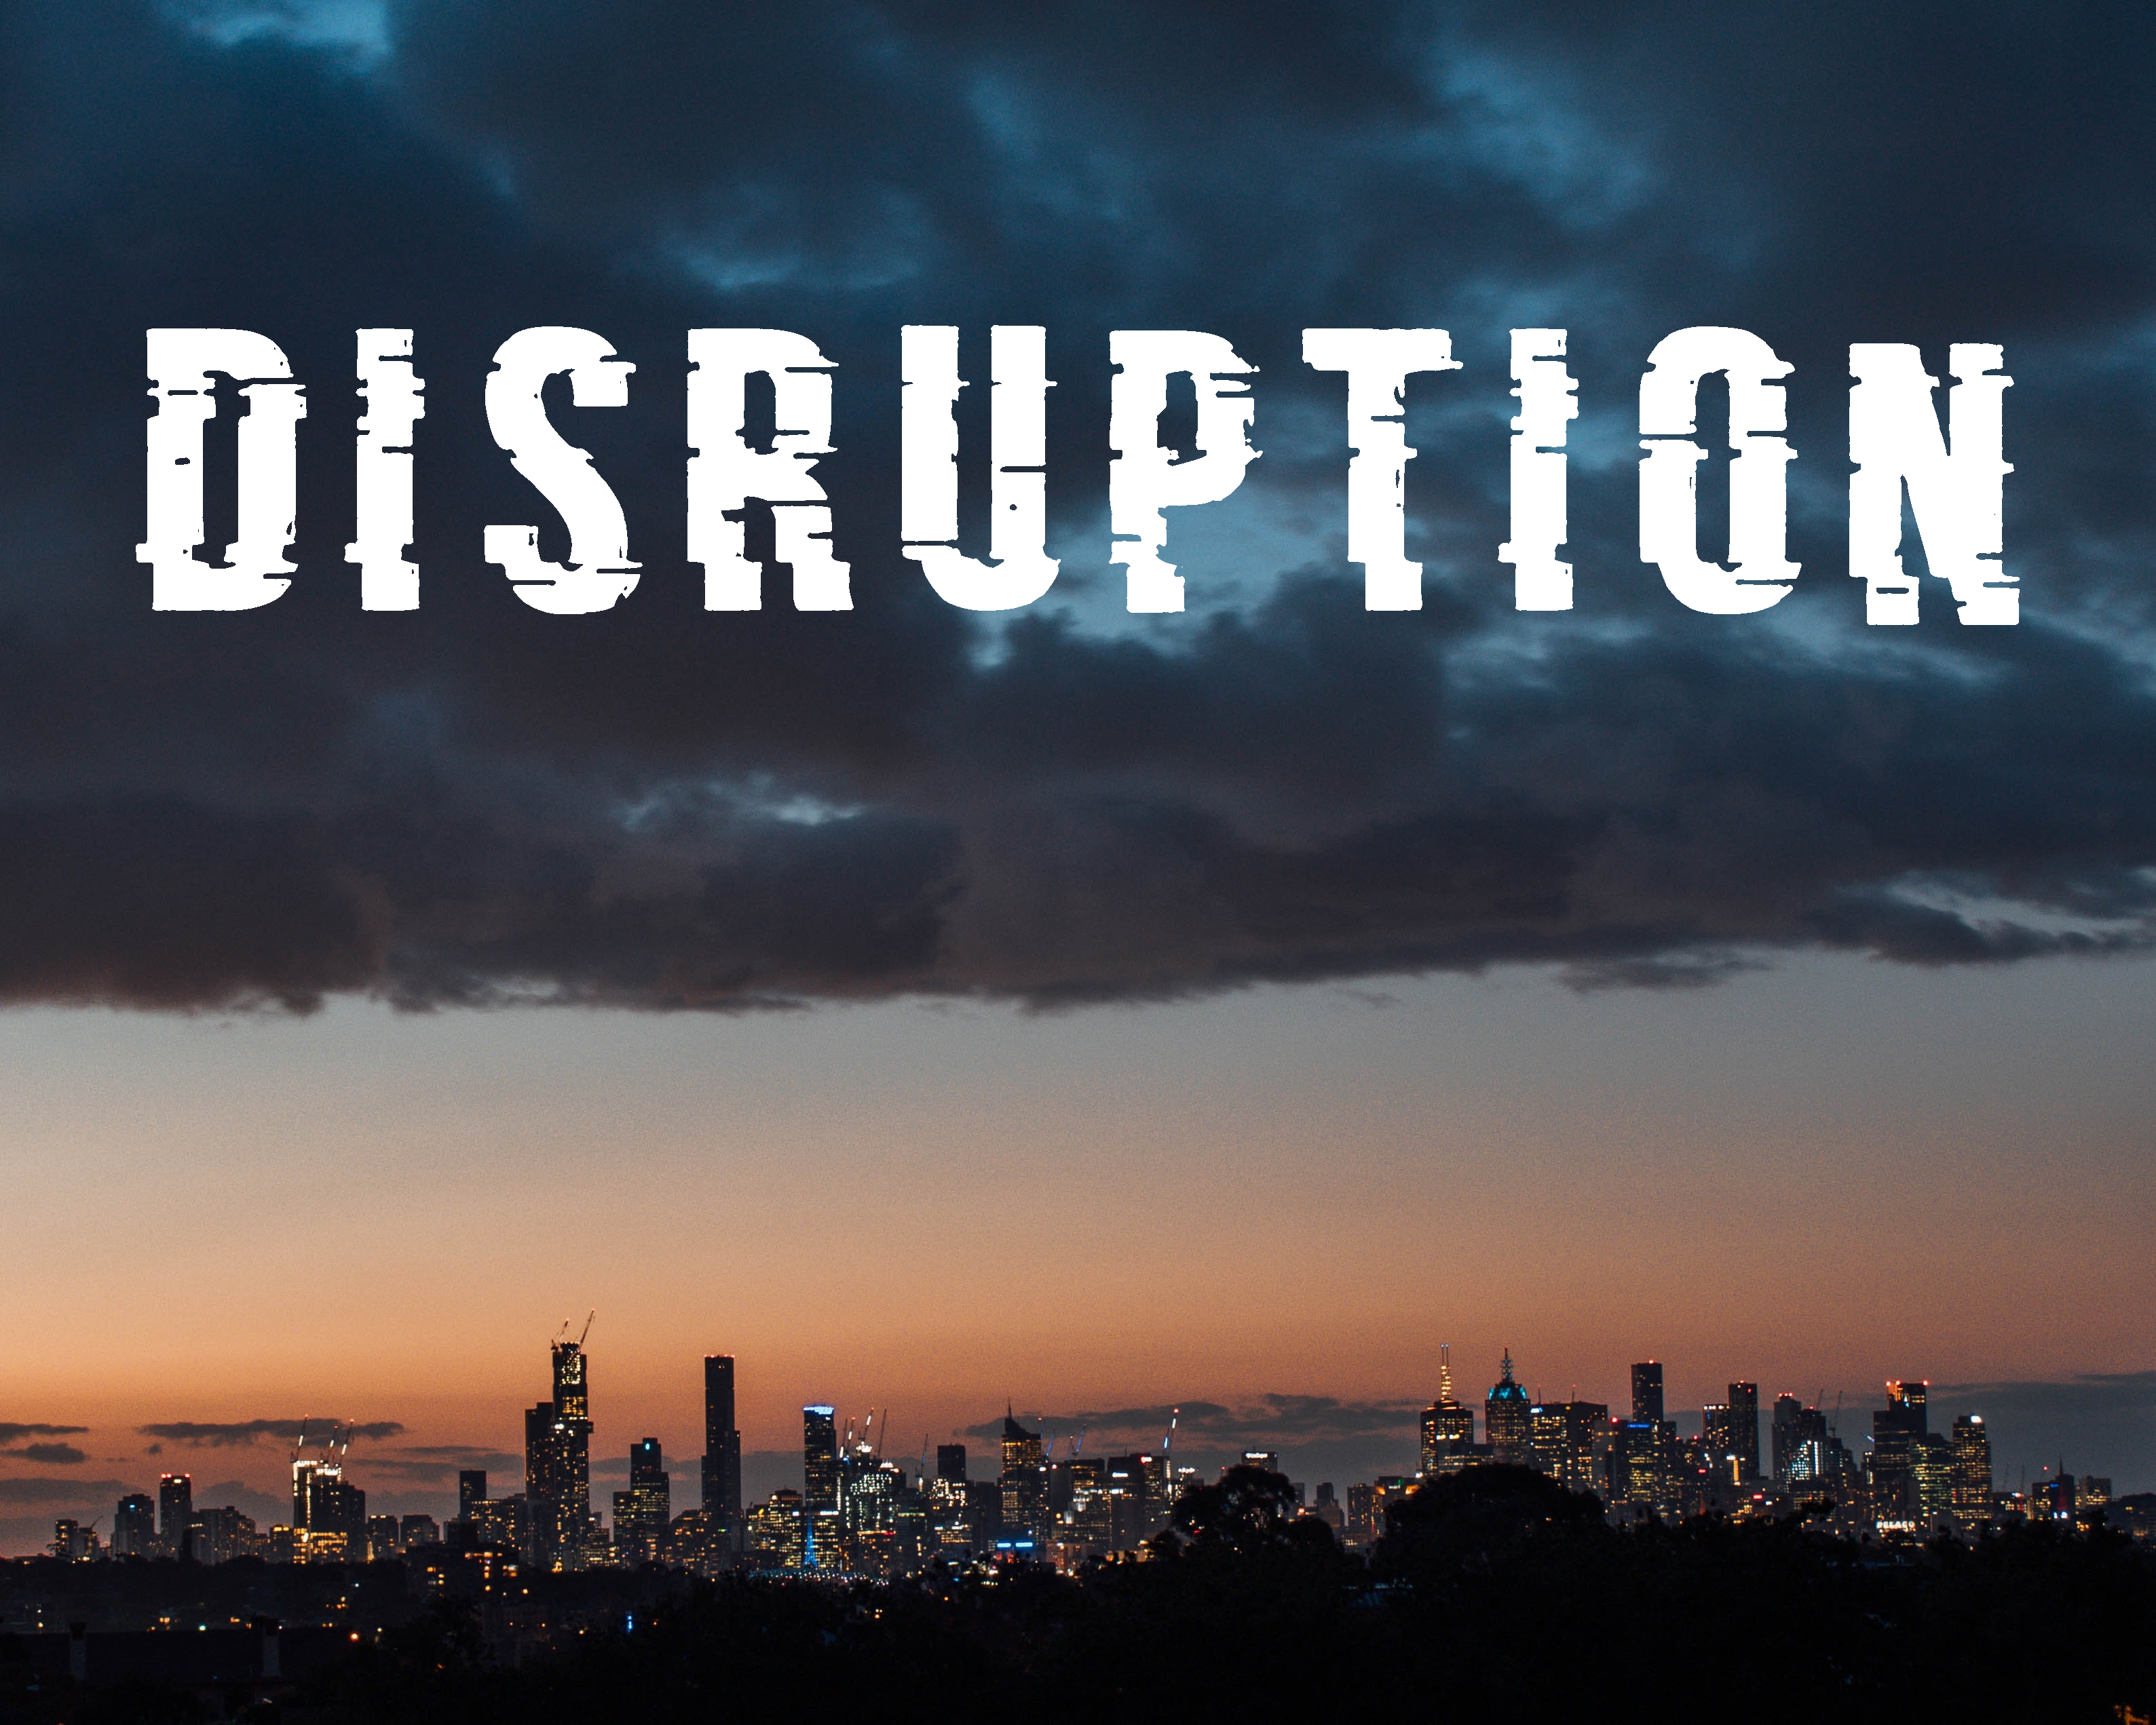 Responding to change brought about by disruption